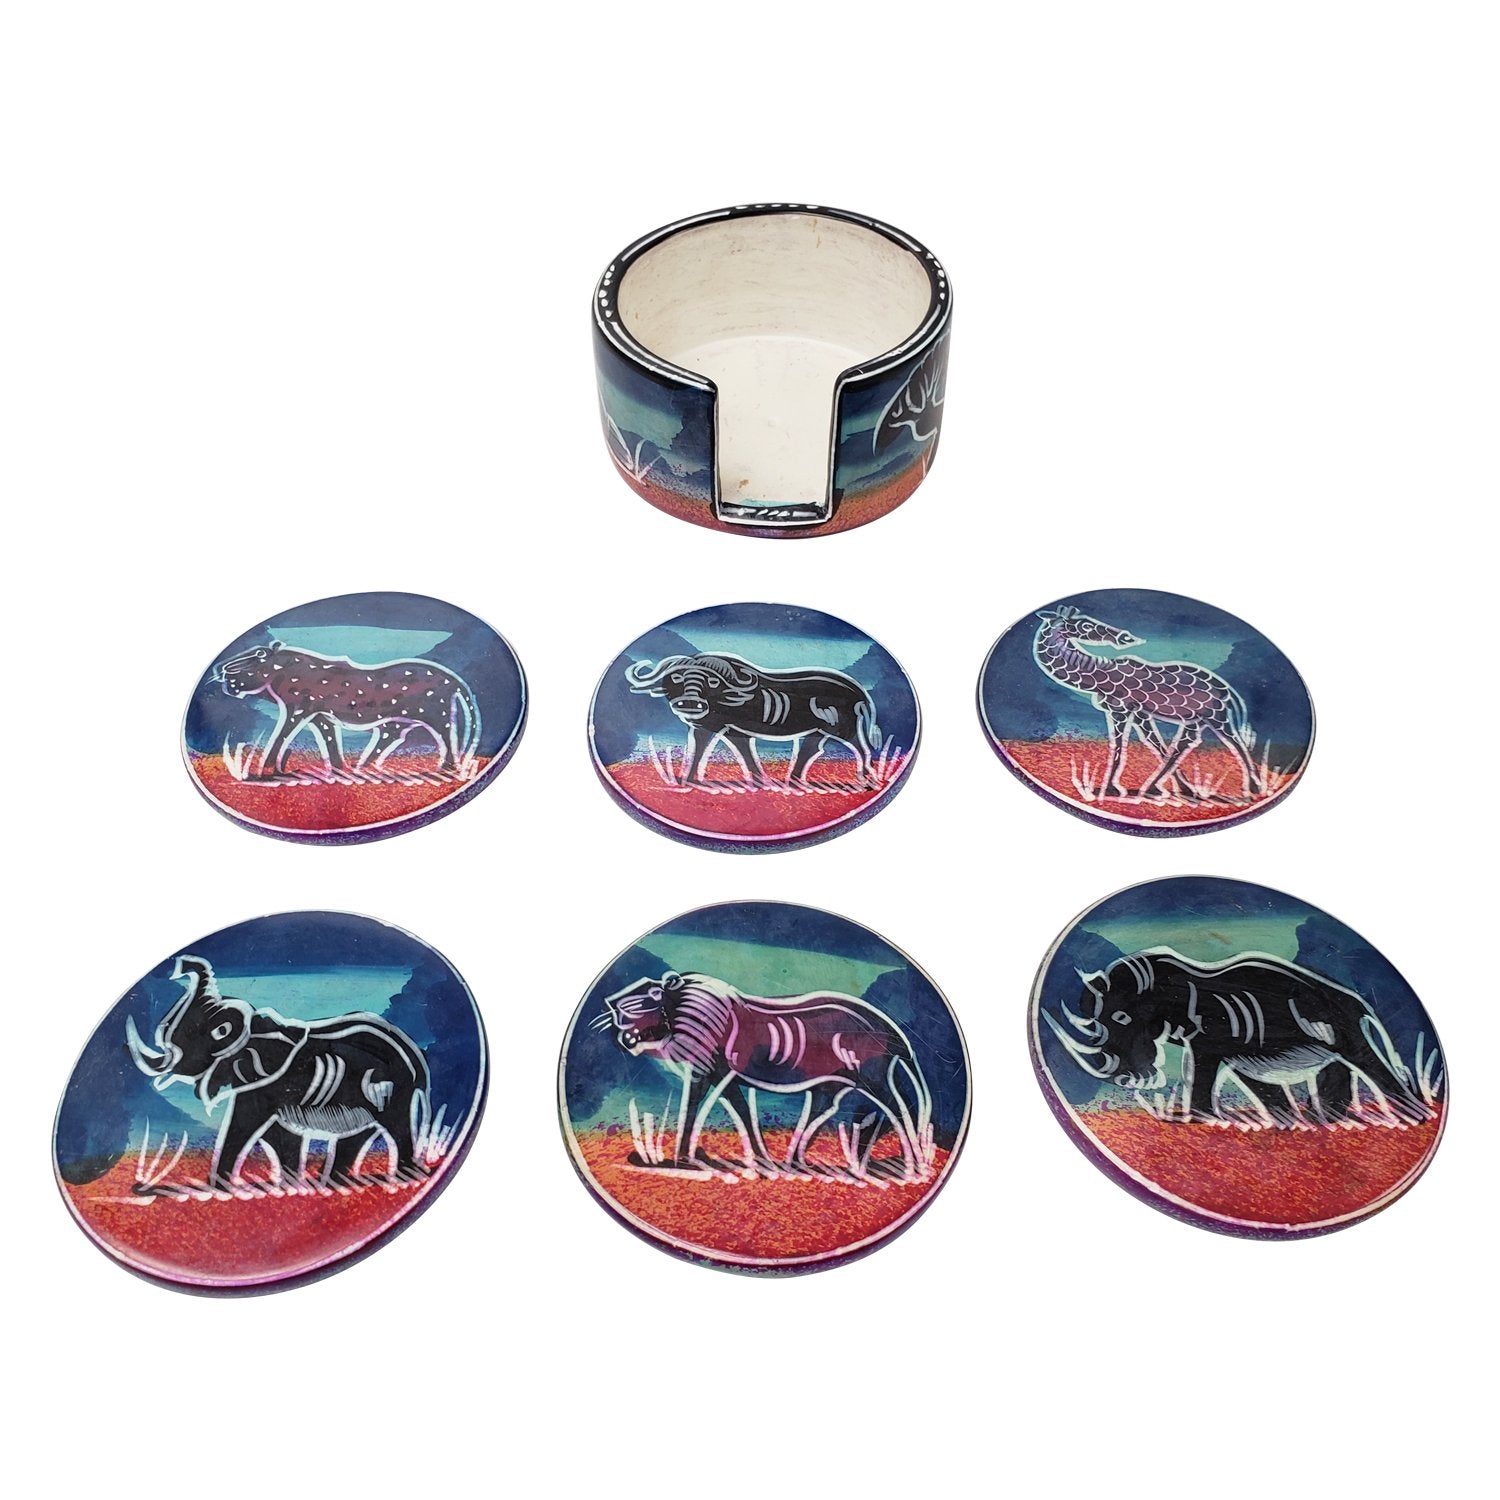 3 of 8: Serengeti at Sunset: Authentic African Hand Made Soapstone Coasters by Boutique Africa